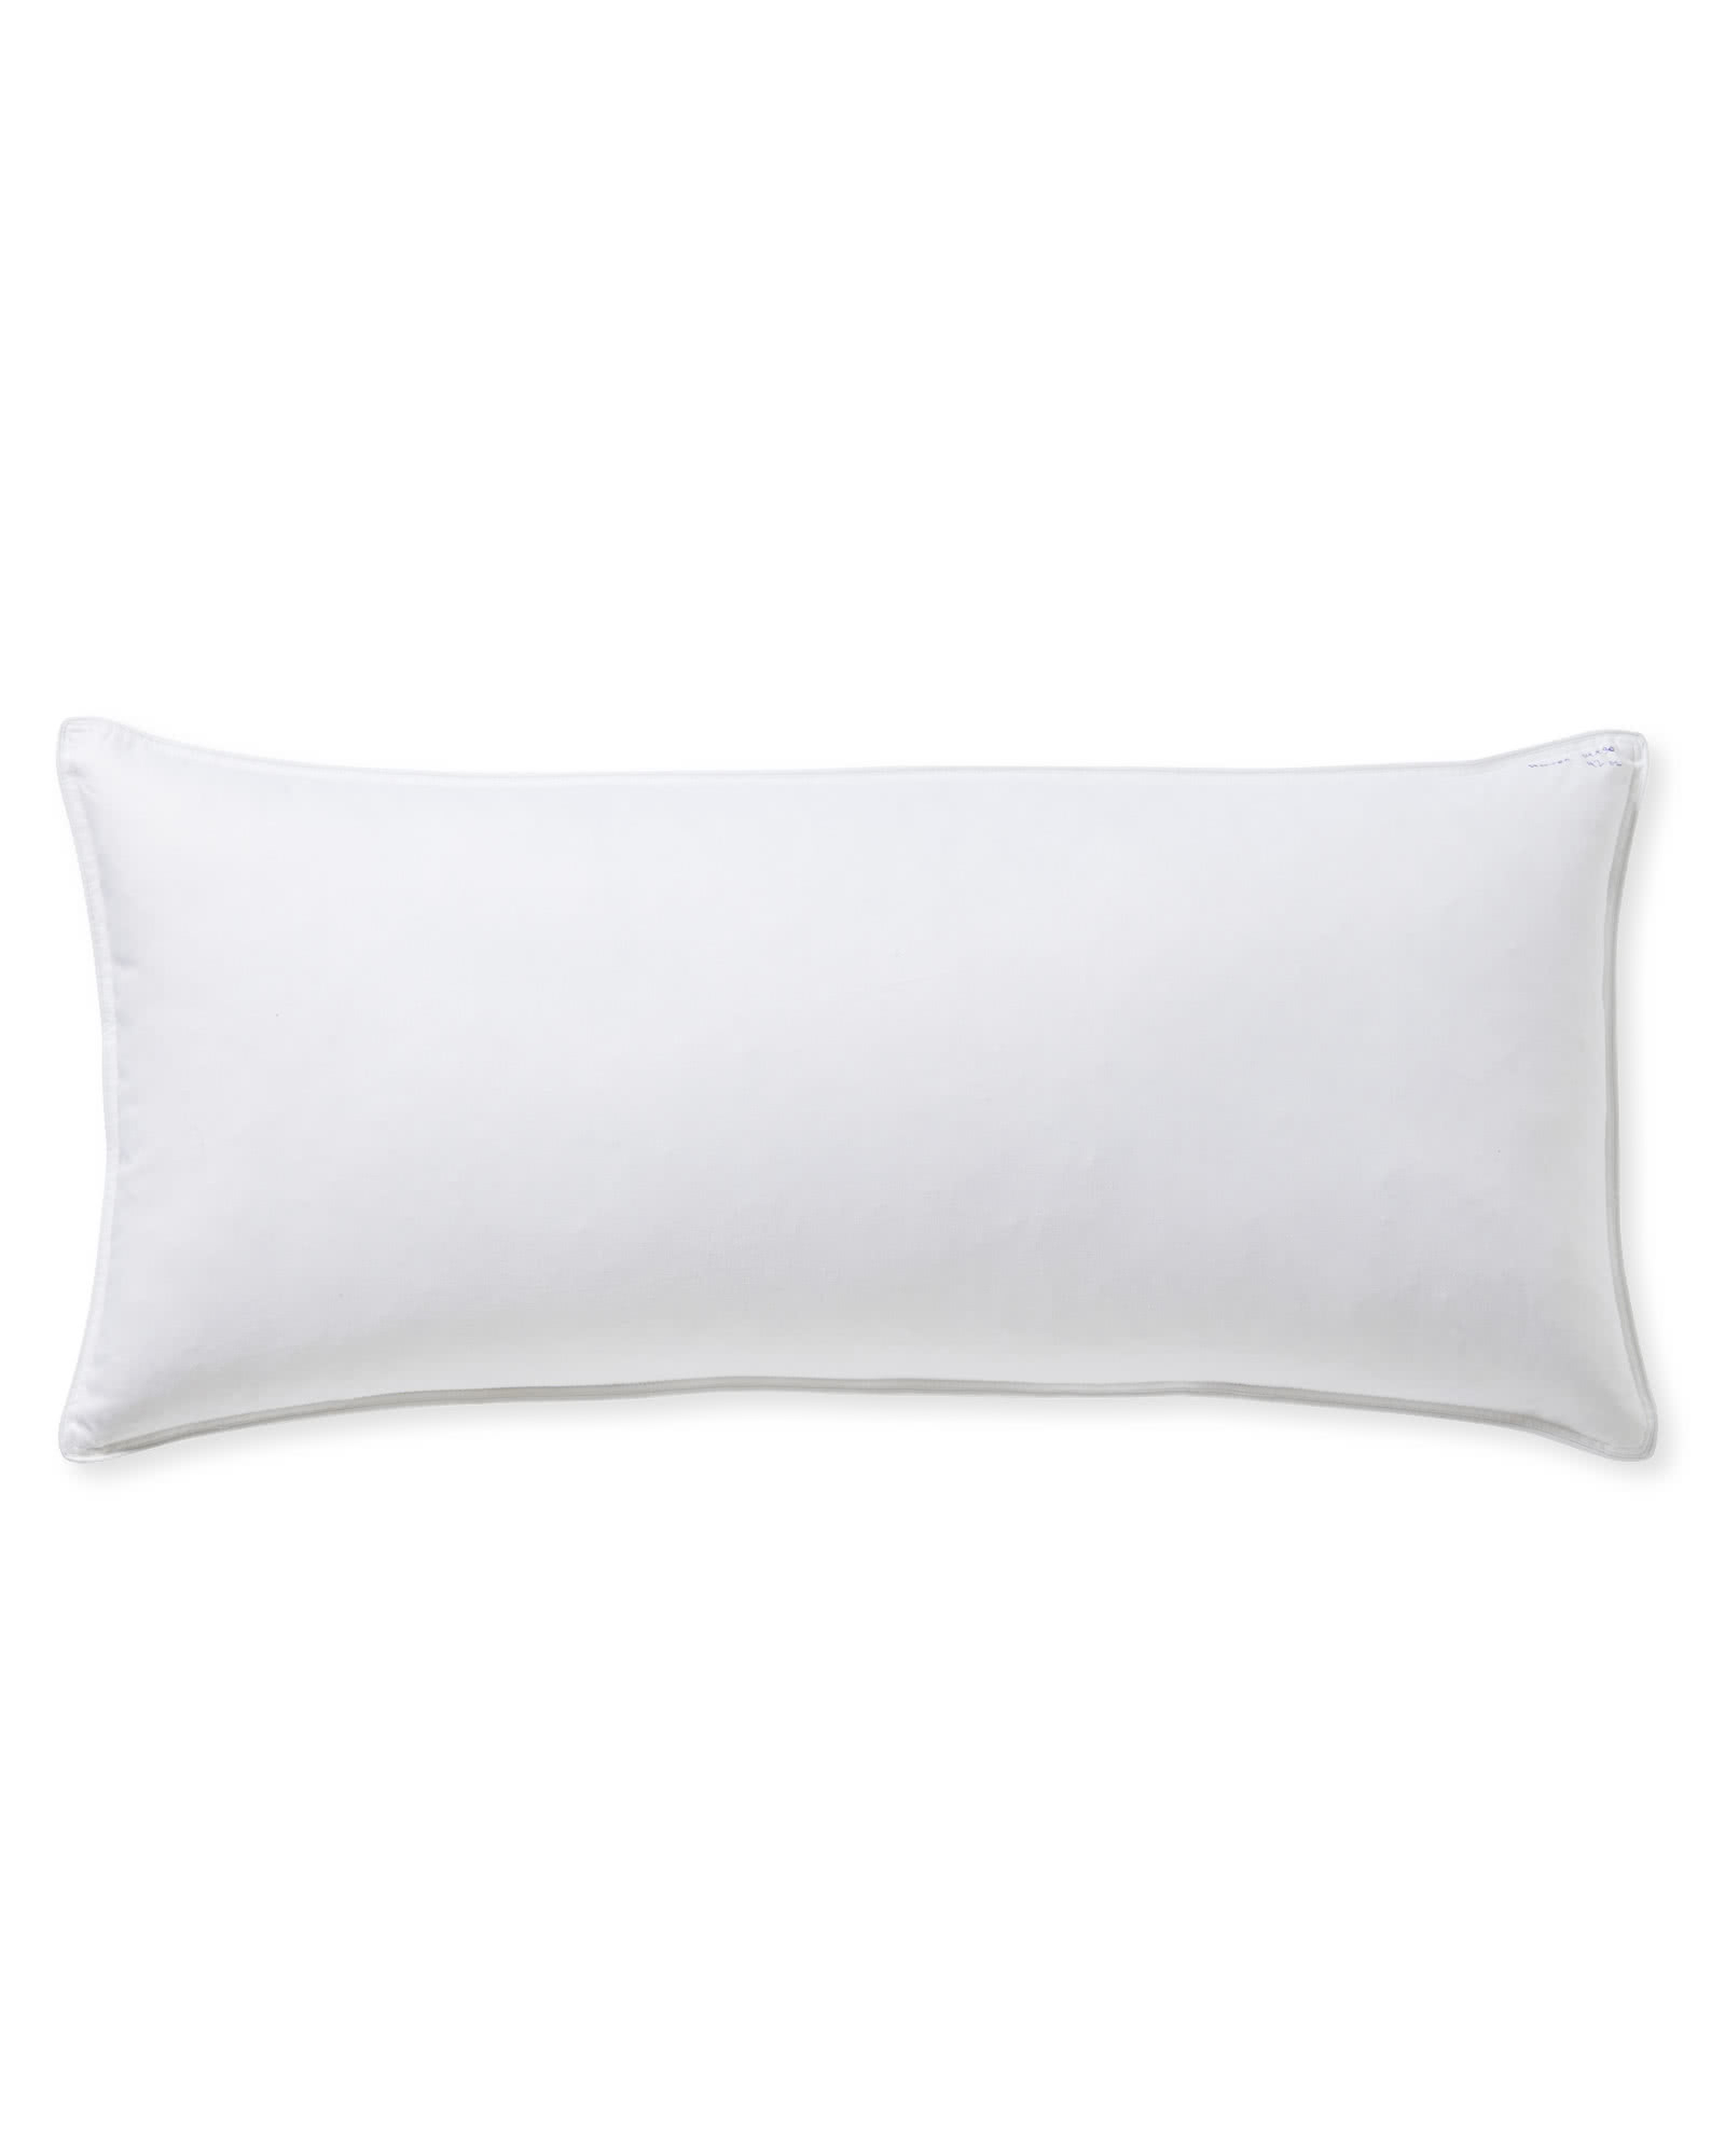 Pillow Insert - 14x30 - Serena and Lily